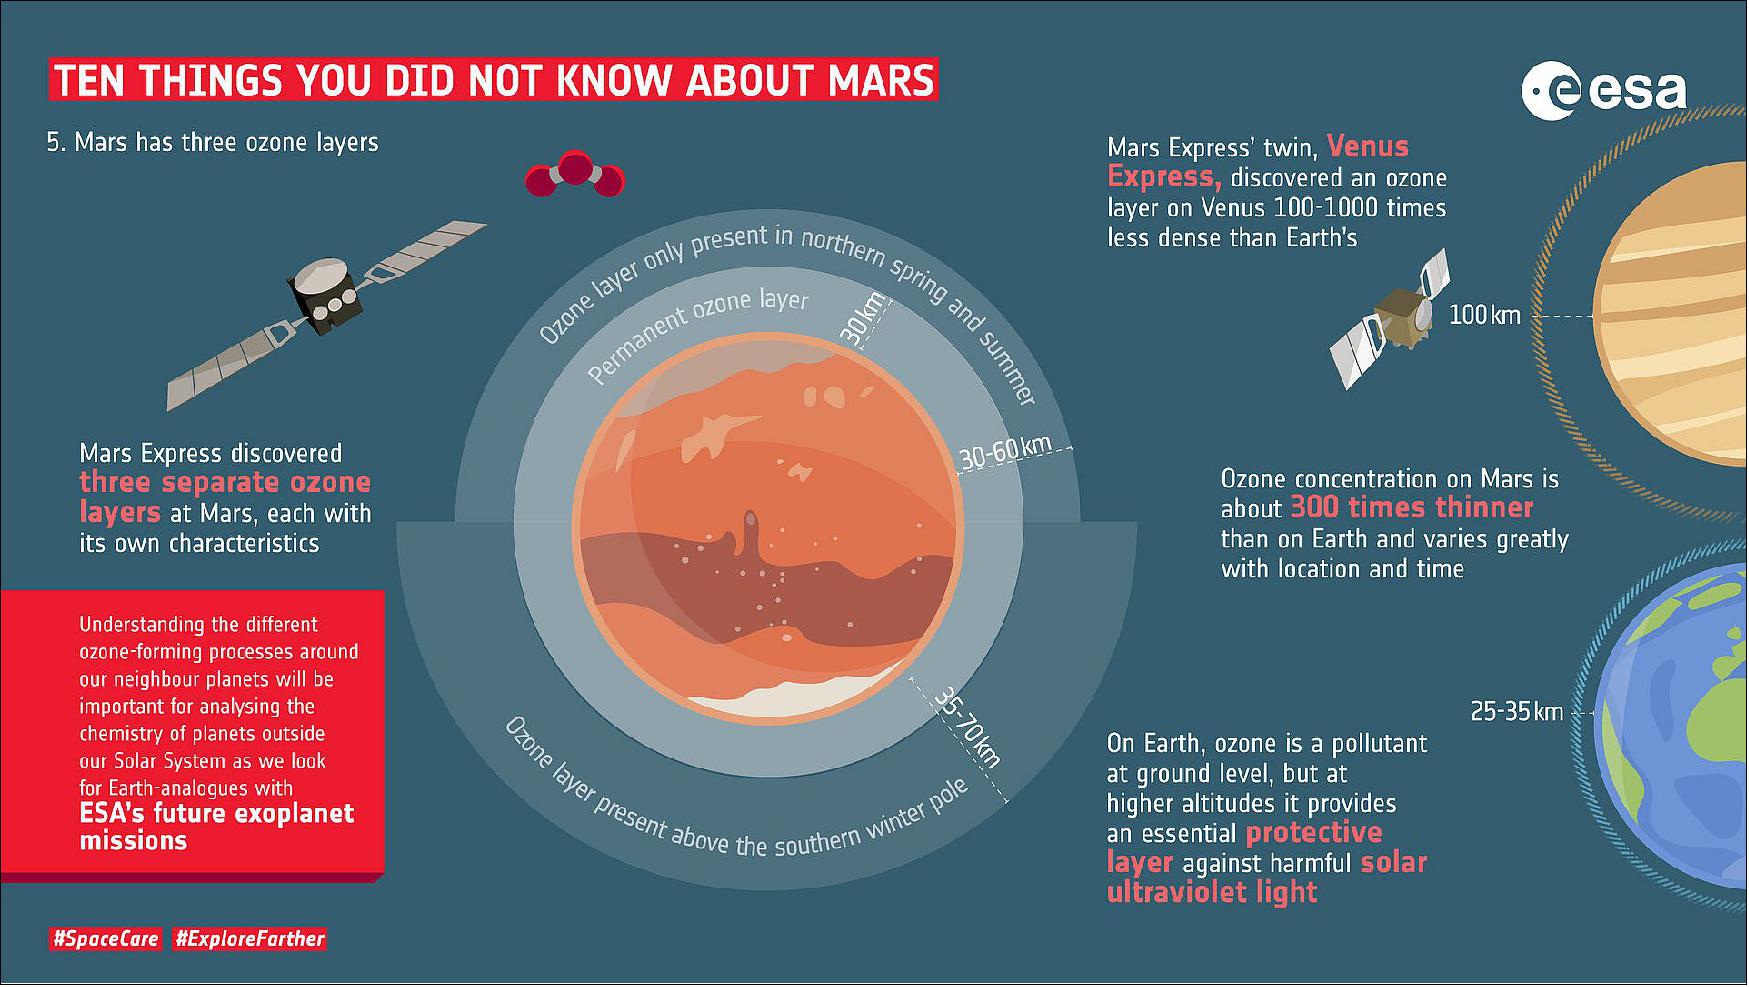 Figure 45: Just like Earth has an ozone layer, so do Venus and Mars. In fact, Mars has three distinct layers, although they are much weaker than the one on Earth and vary greatly in location and with time. Ozone, a molecule containing three oxygen atoms – is a pollutant at ground level on Earth (it is the main ingredient of urban smog) but at higher altitudes it provides an essential protective layer against harmful solar ultraviolet light, which is why the ozone hole is so concerning. Plant life today plays a critical role in taking in carbon dioxide and replenishing our oxygen and ozone. But ozone is also found on Venus and Mars, where it is created by non-biological means. On these planets ozone is formed when sunlight breaks up carbon dioxide molecules, releasing oxygen atoms, which can sometimes re-combine into ozone molecules. Understanding the different ozone-forming processes on different planets will be important for studying the diversity of exoplanets, in case the combination of ozone with other atmospheric constituents is relevant from a biological perspective. - ESA has a fleet of upcoming exoplanet missions – Cheops, Plato and Ariel – that will each tackle a different aspect of exoplanet science. In particular, Ariel, the Atmospheric Remote-Sensing Infrared Exoplanet Large-survey mission, will perform a chemical census of a large and diverse sample of exoplanets by analyzing their atmospheres in great detail. - ESA has demonstrated expertise in studying Mars from orbit, now we are looking to secure a safe landing, to rove across the surface and to drill underground to search for evidence of life. Our orbiters are already in place to provide data relay services for surface missions. The next logical step is to bring samples back to Earth, to provide access to Mars for scientists globally, and to better prepare for future human exploration of the Red Planet. - This set of infographics highlight’s ESA’s contribution to Mars exploration as we ramp up to the launch of our second ExoMars mission, and look beyond to completing a Mars Sample Return mission (image credit: ESA, S. Poletti)